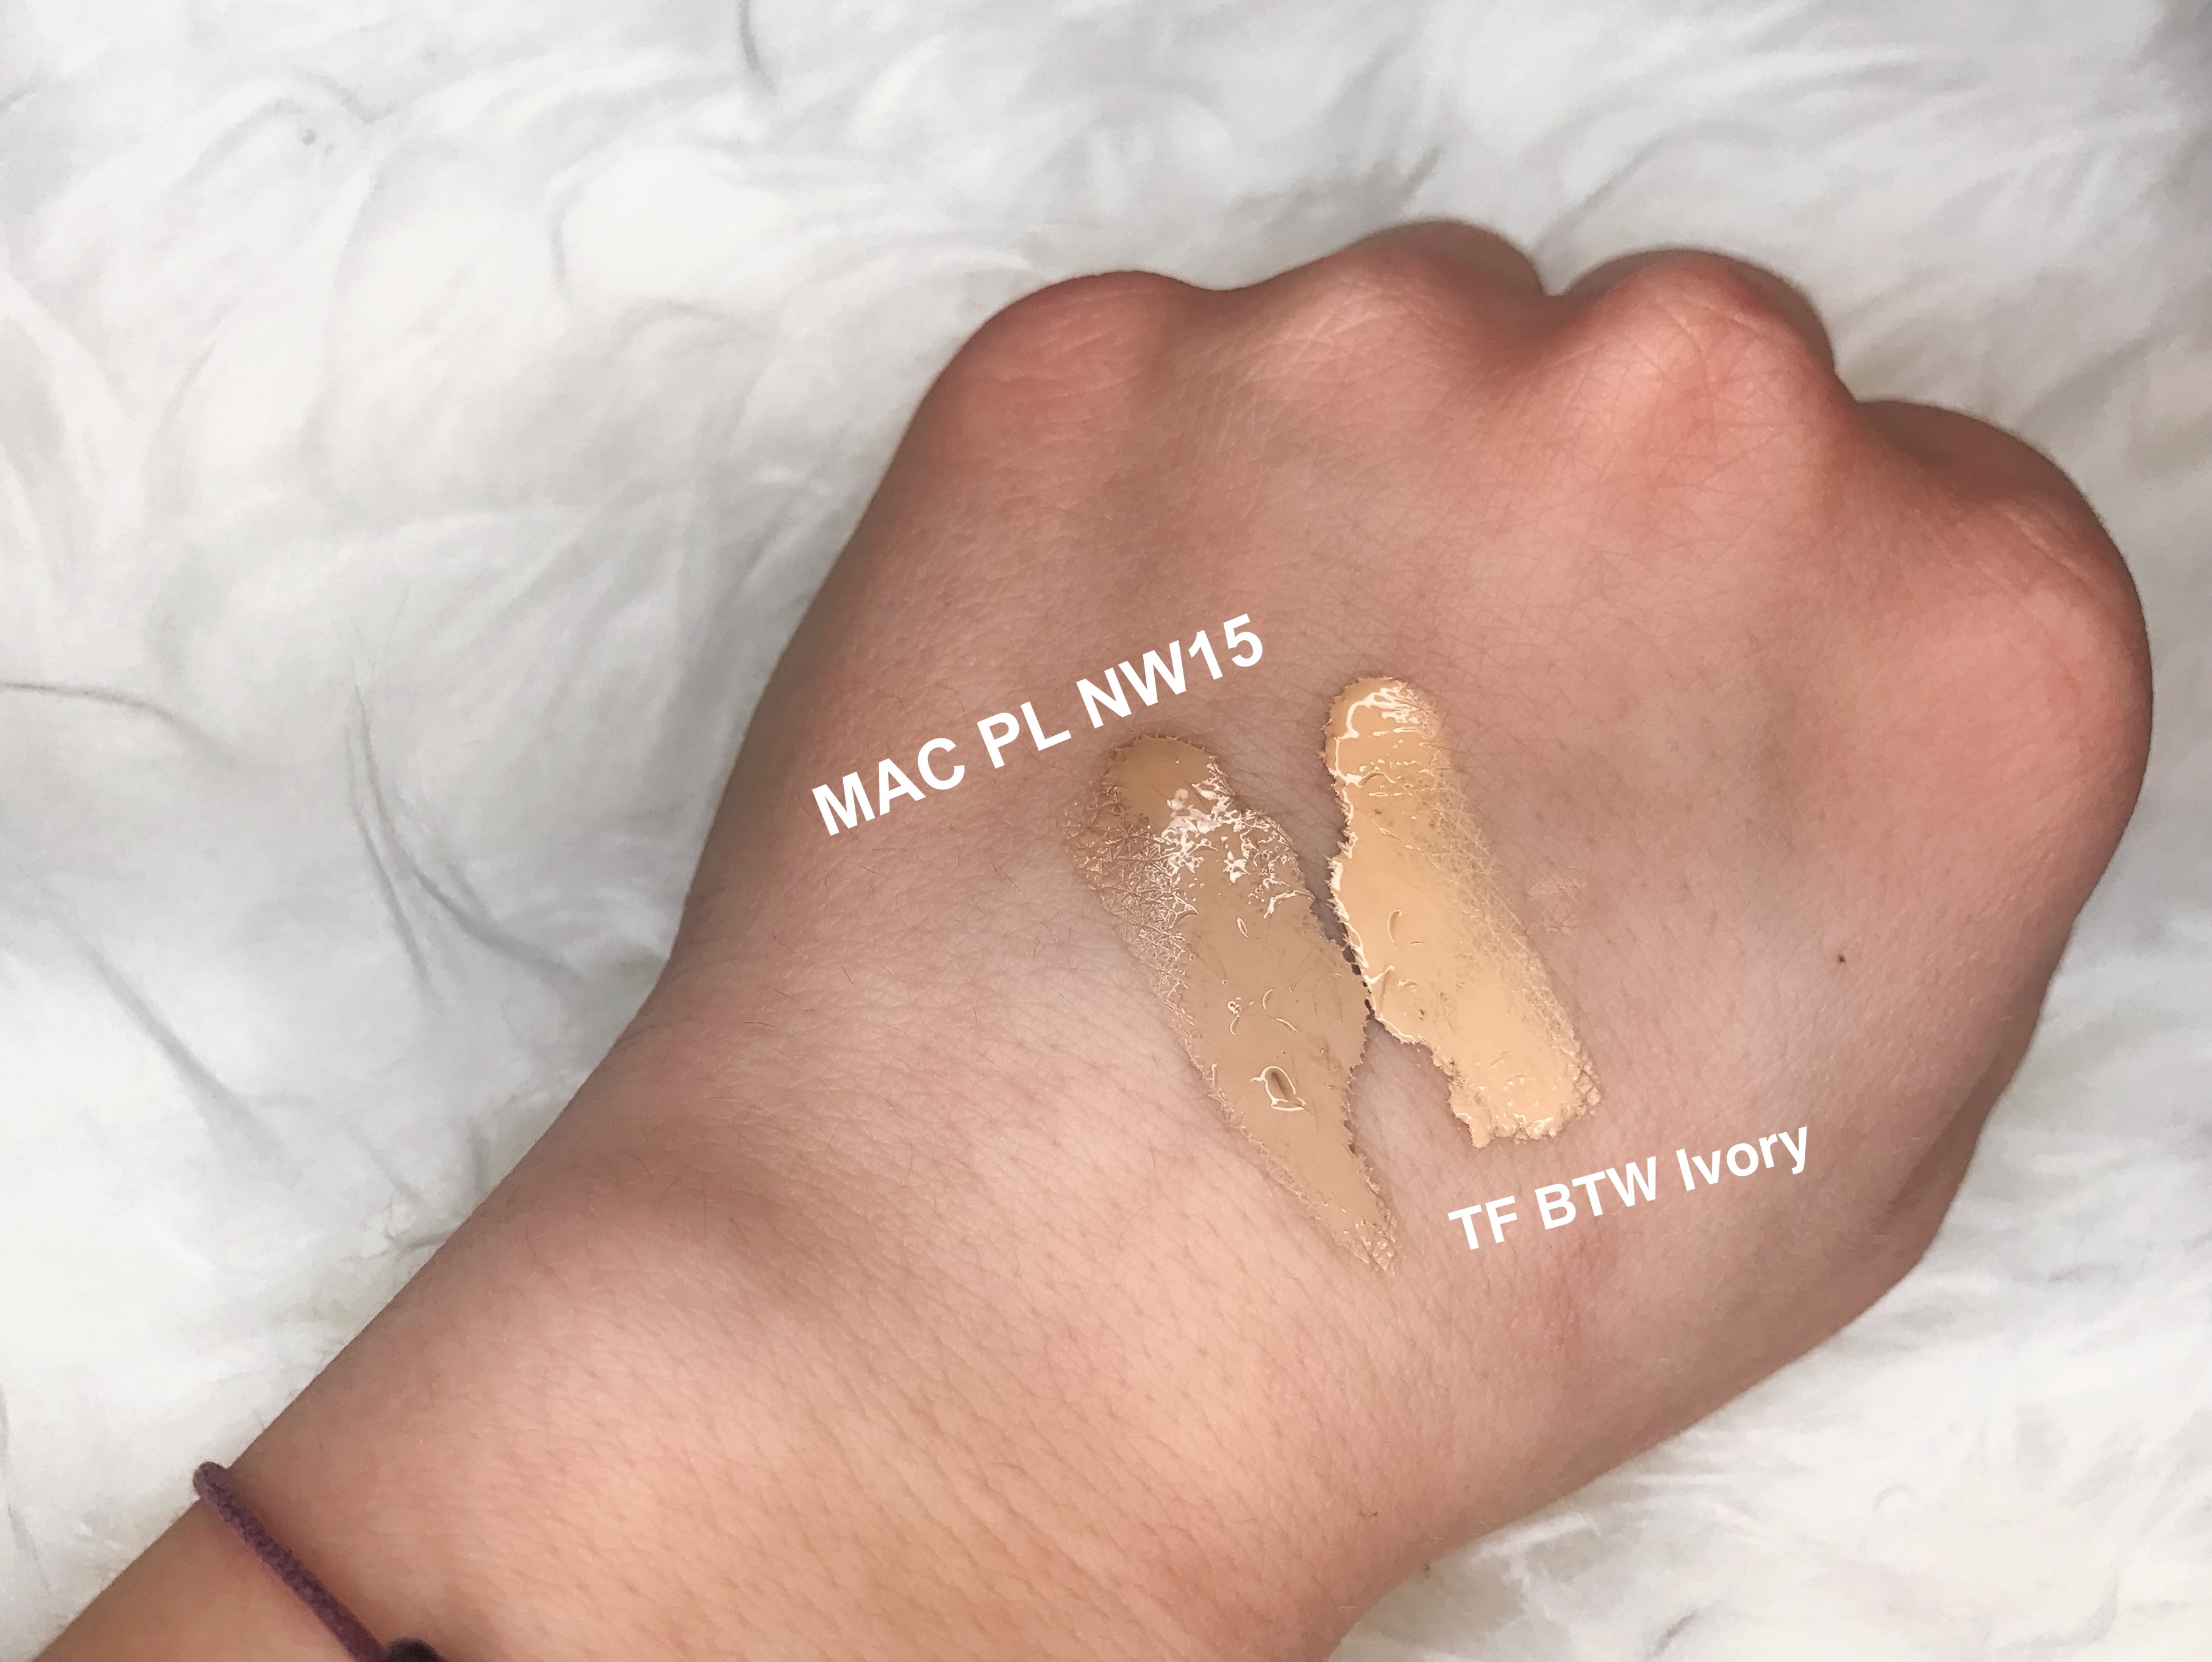 Mac pro longwear foundation nw15 Vs born this way too faced ivory swatches